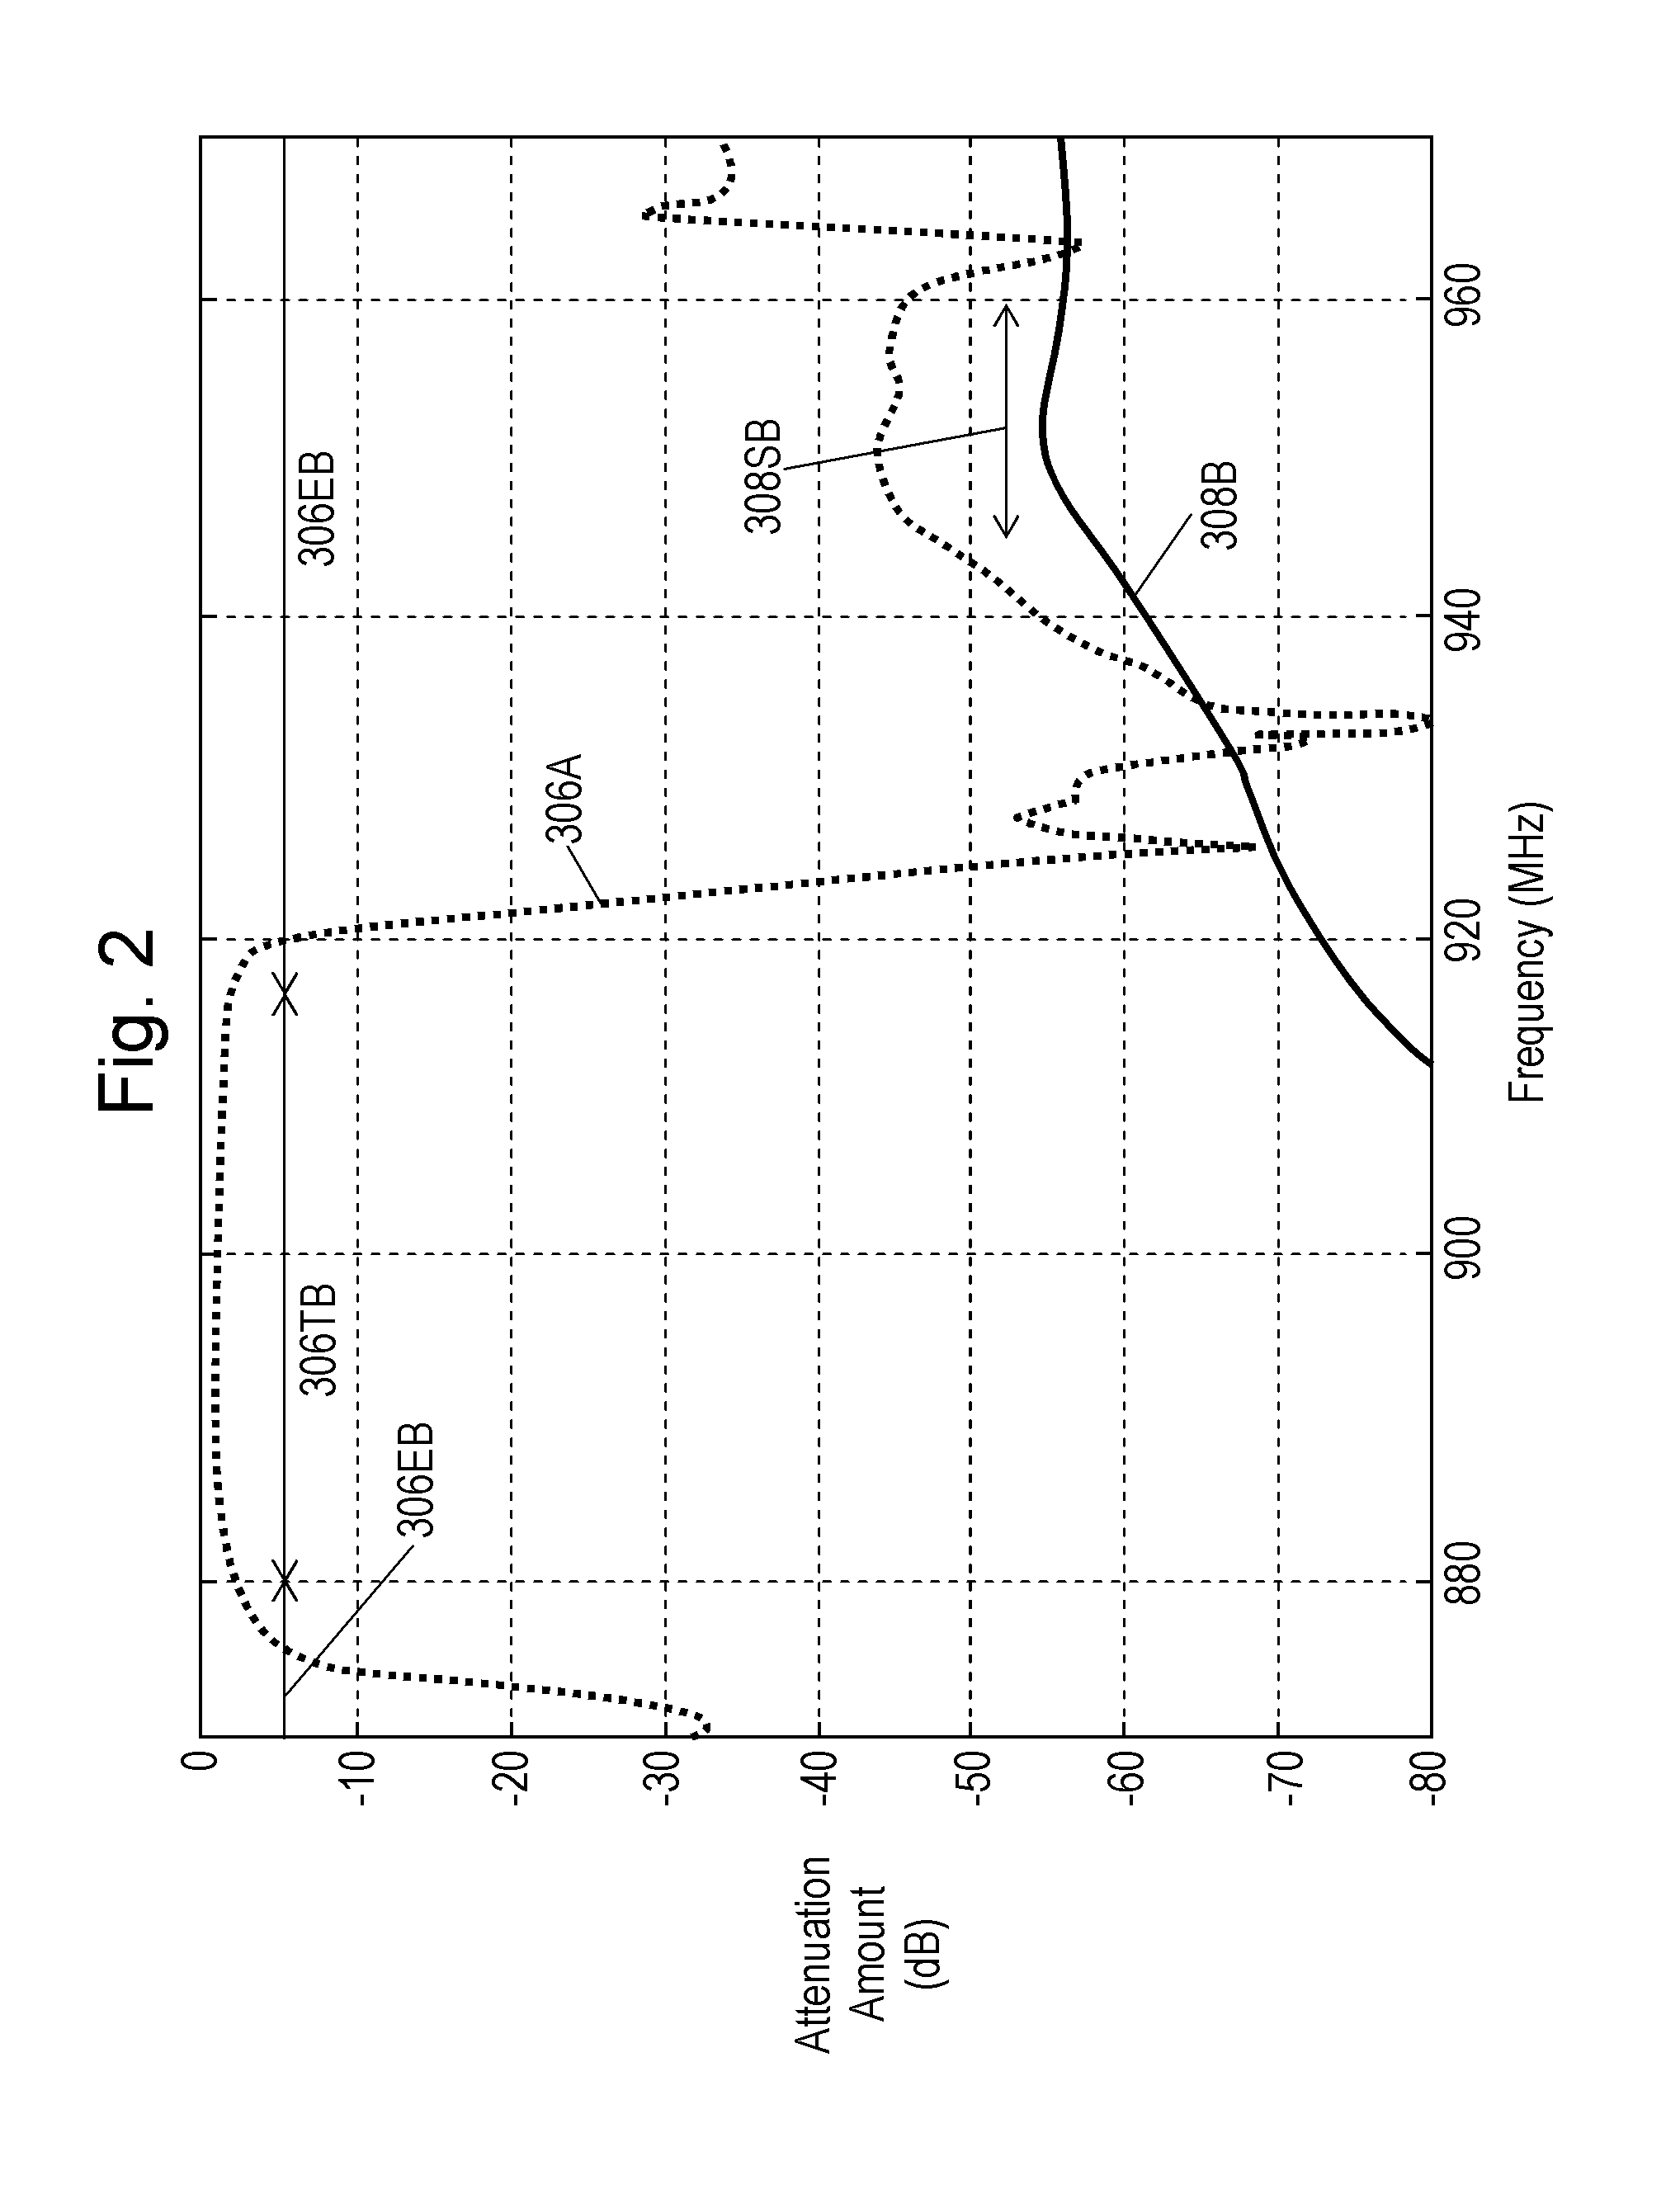 Electronic device including filter